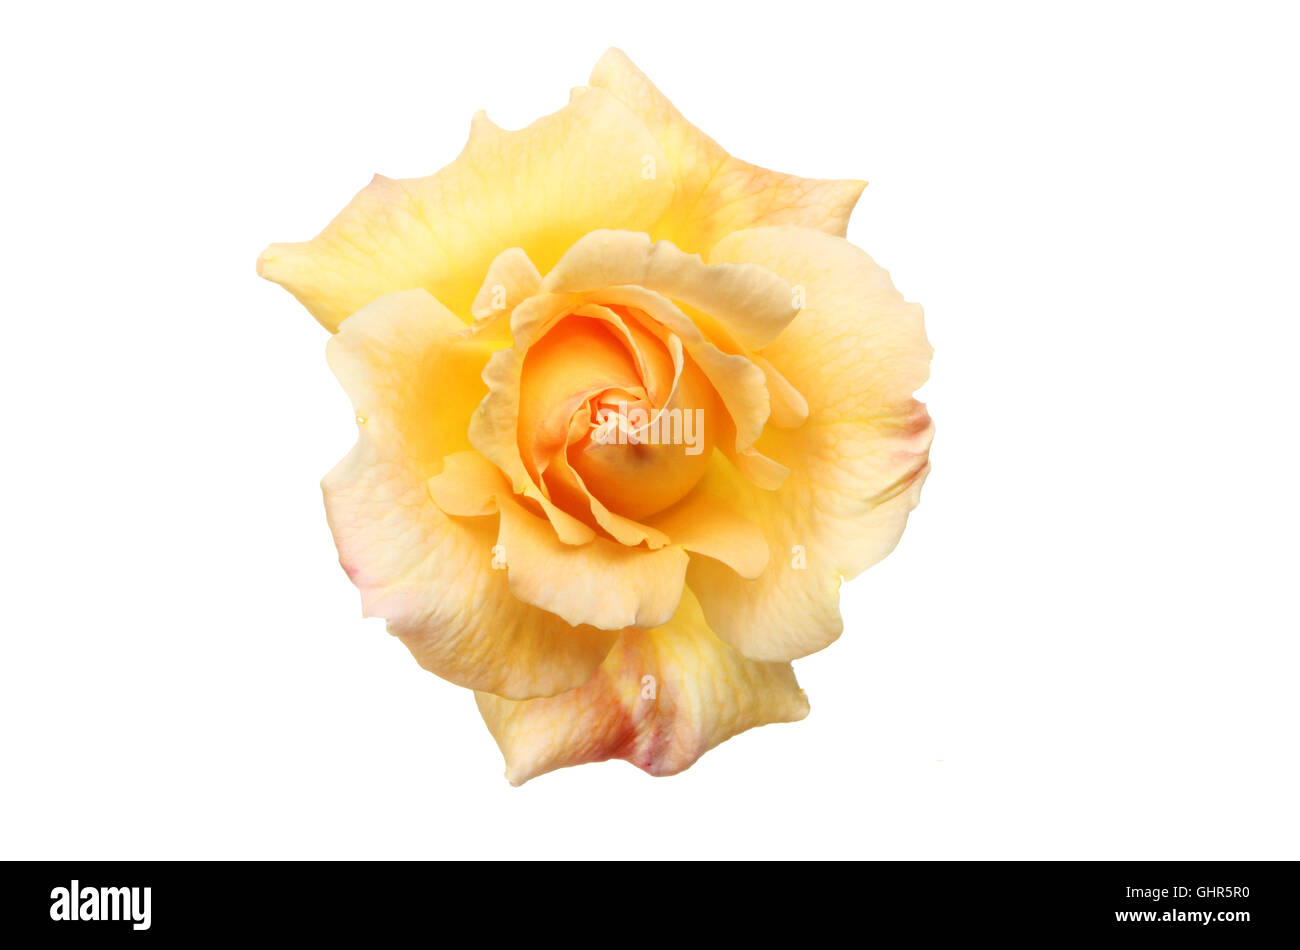 Peach colored rose flower isolated against white Stock Photo